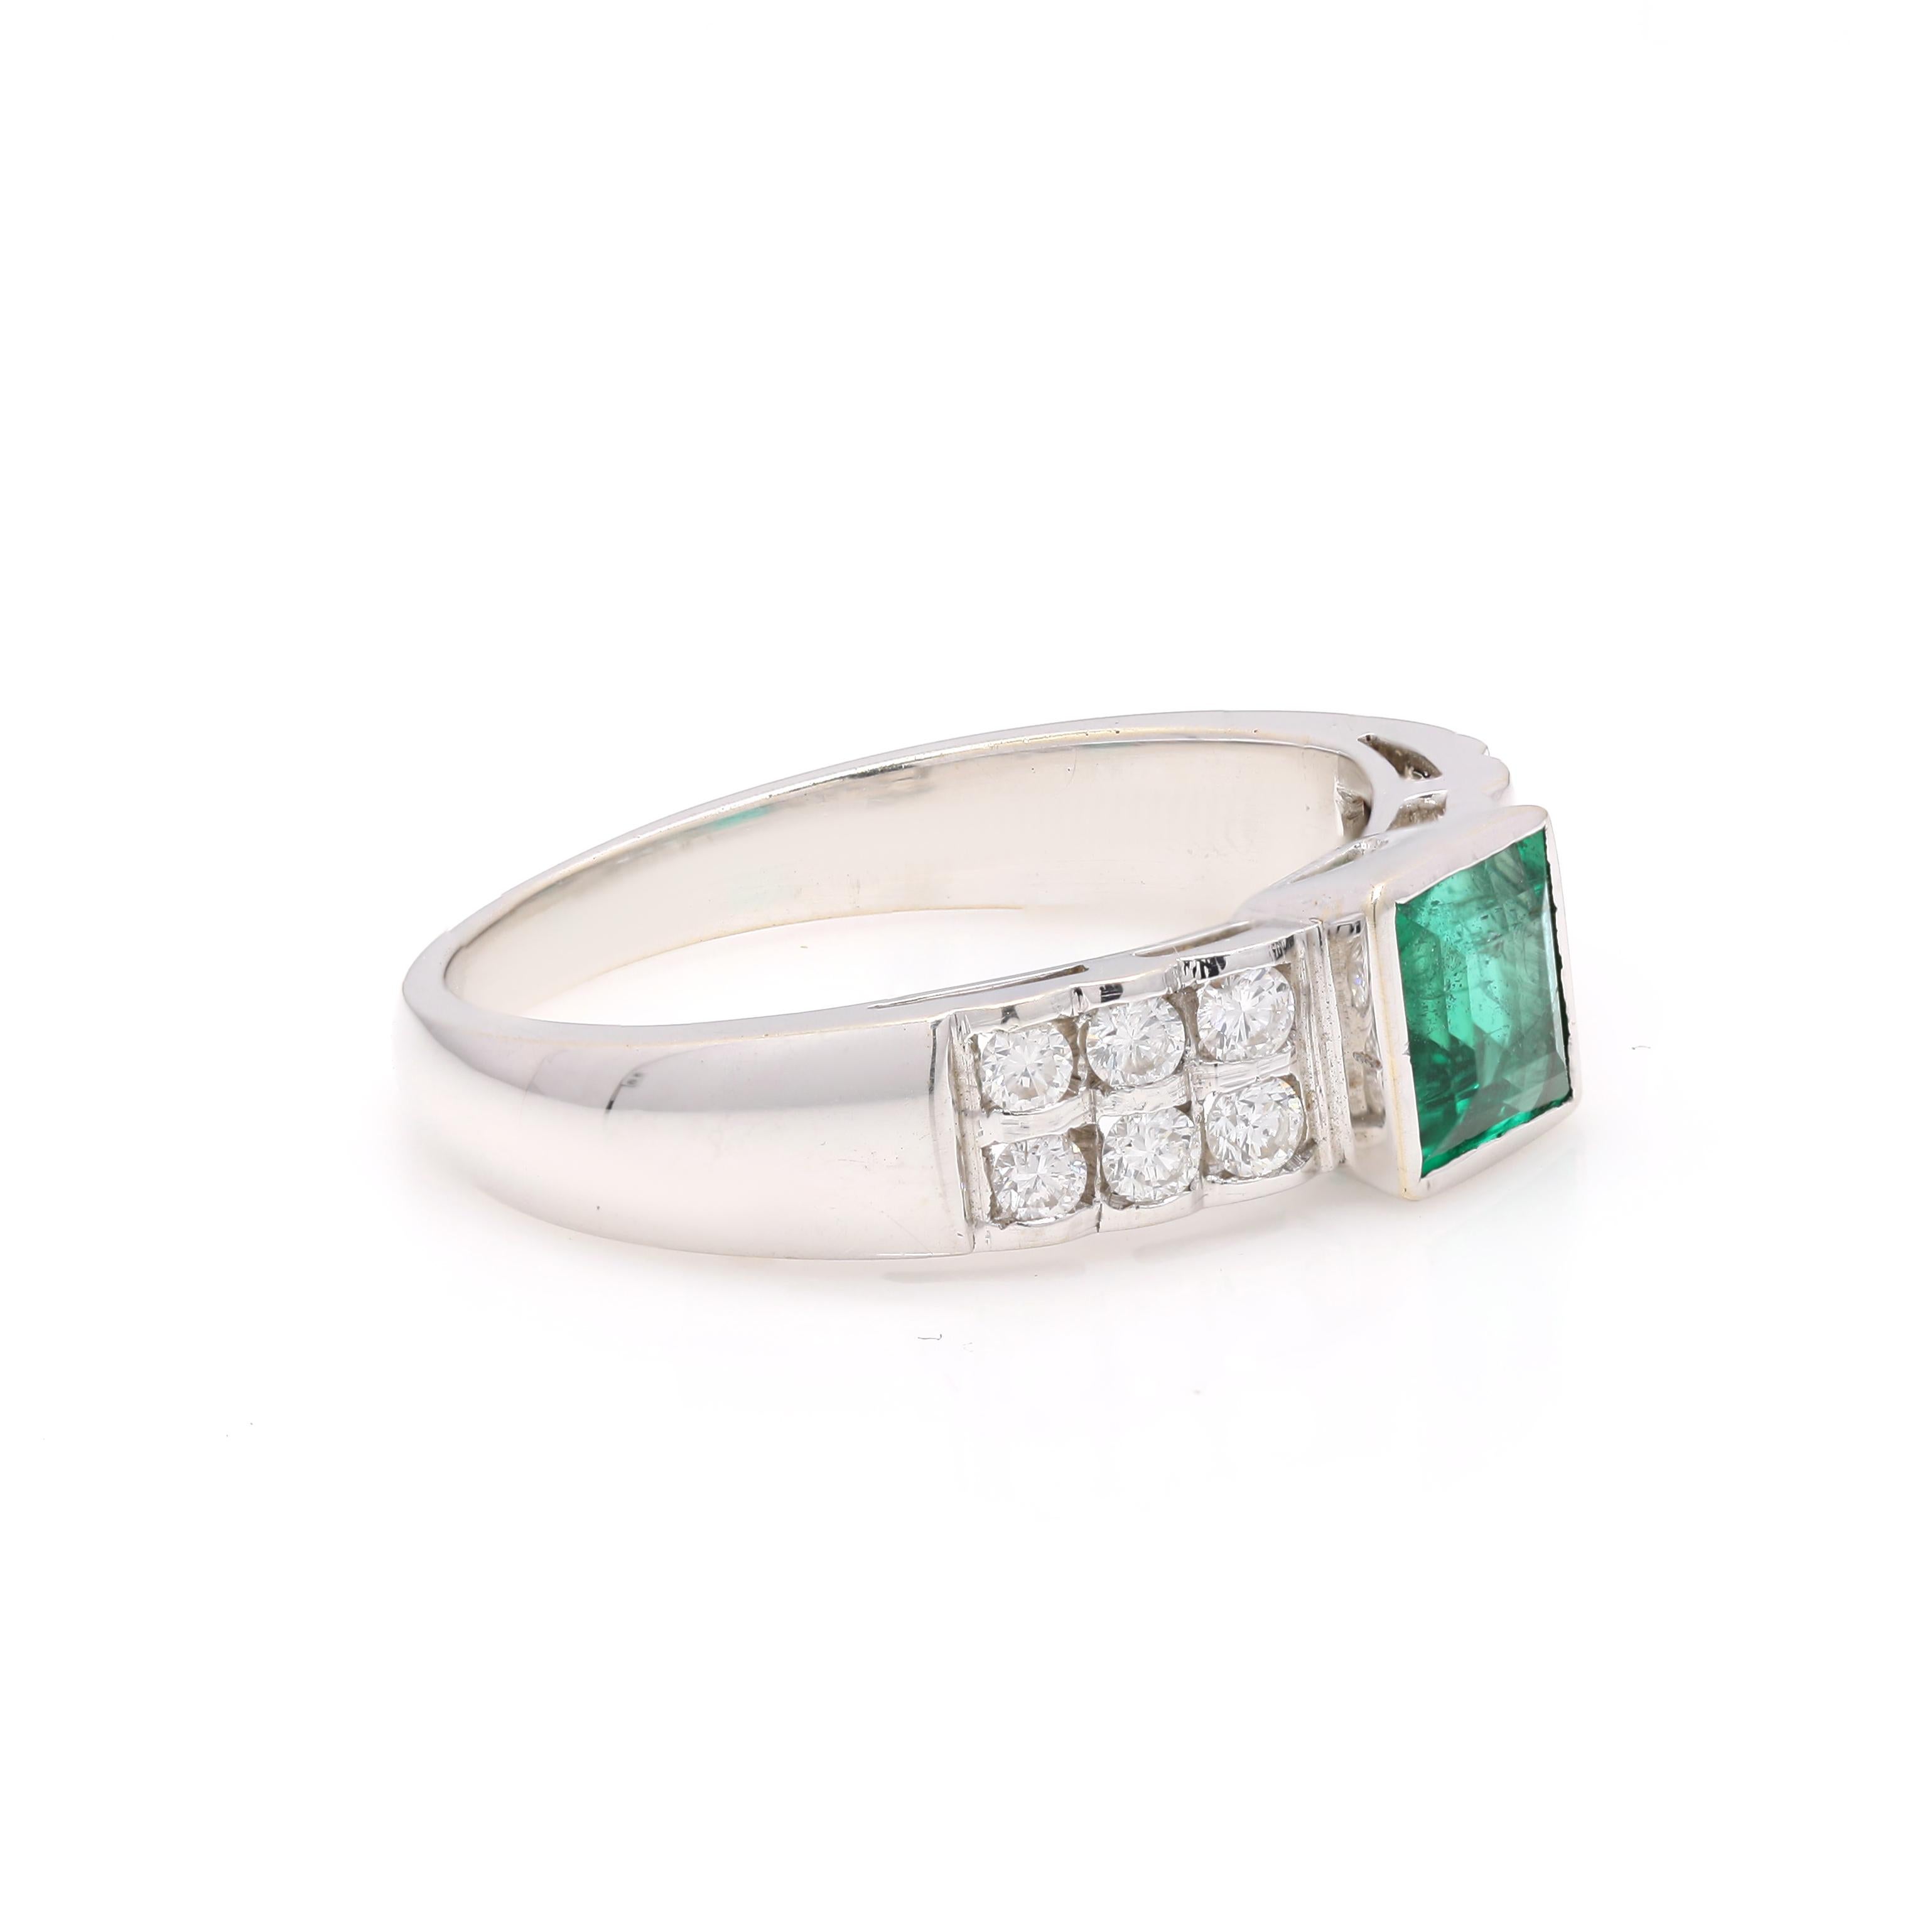 For Sale:  Unisex Diamond and Emerald Wedding Band Ring in 18k White Gold for Men 2